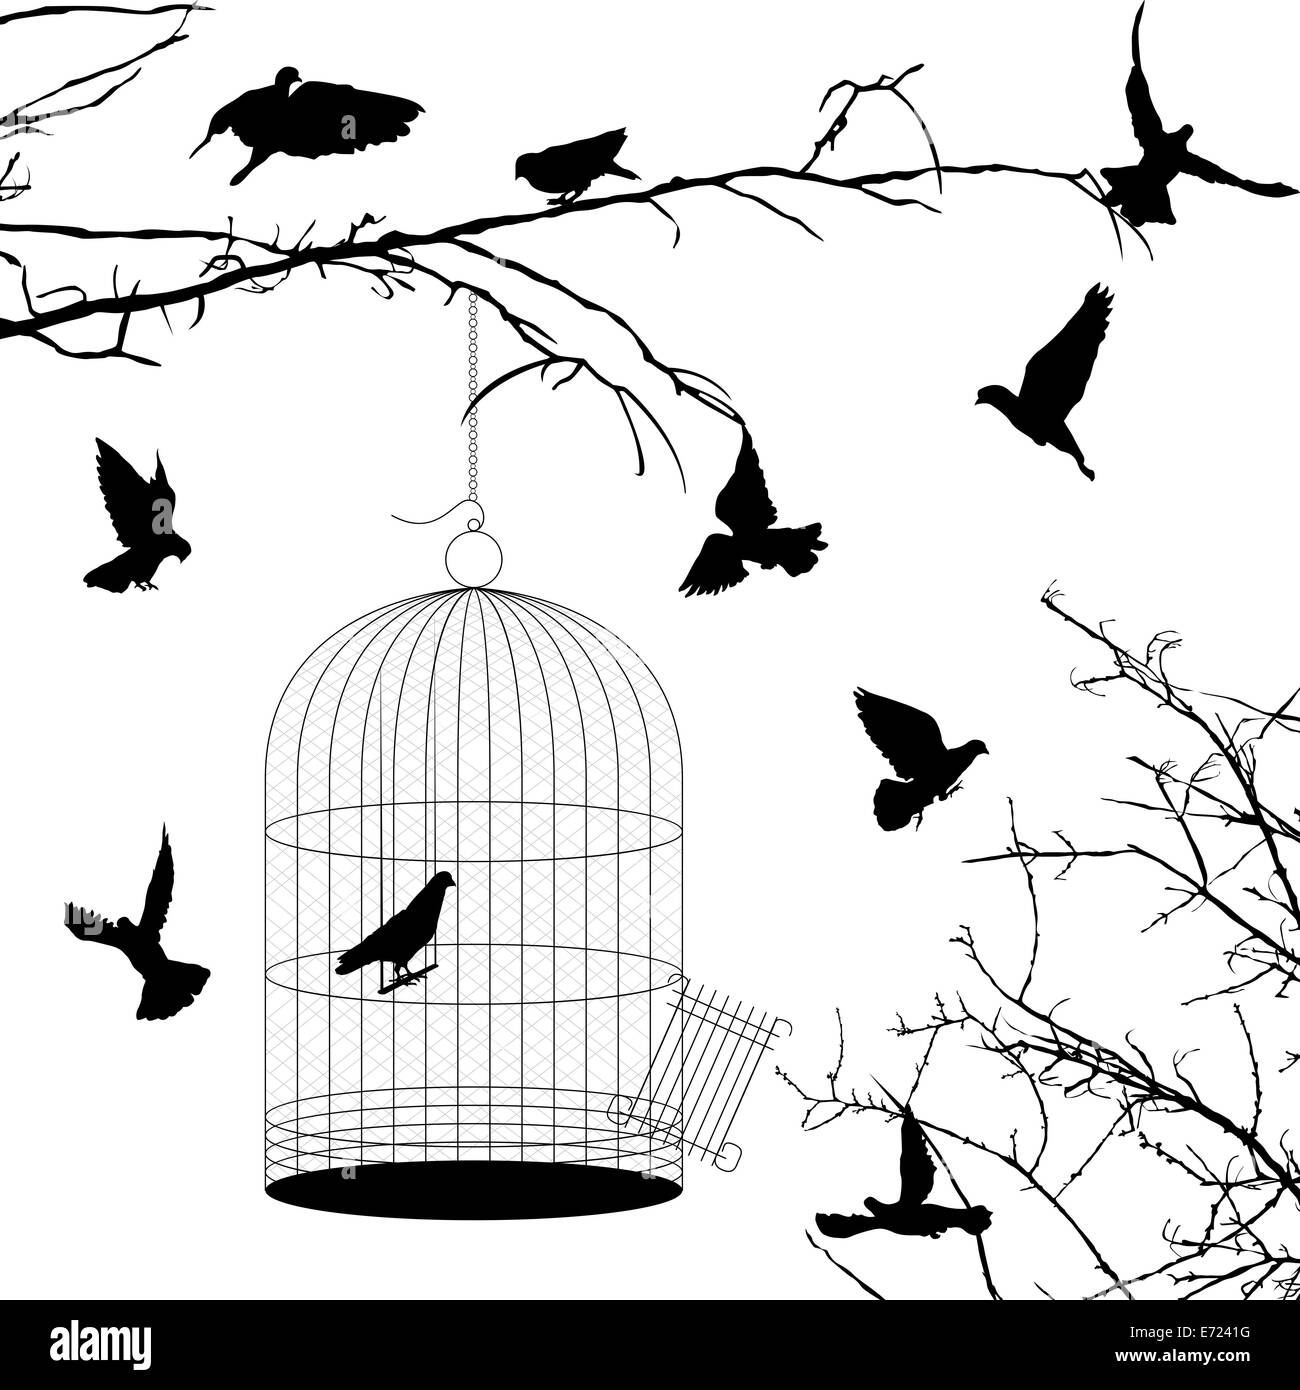 Birds and cage silhouettes over white background Stock Photo